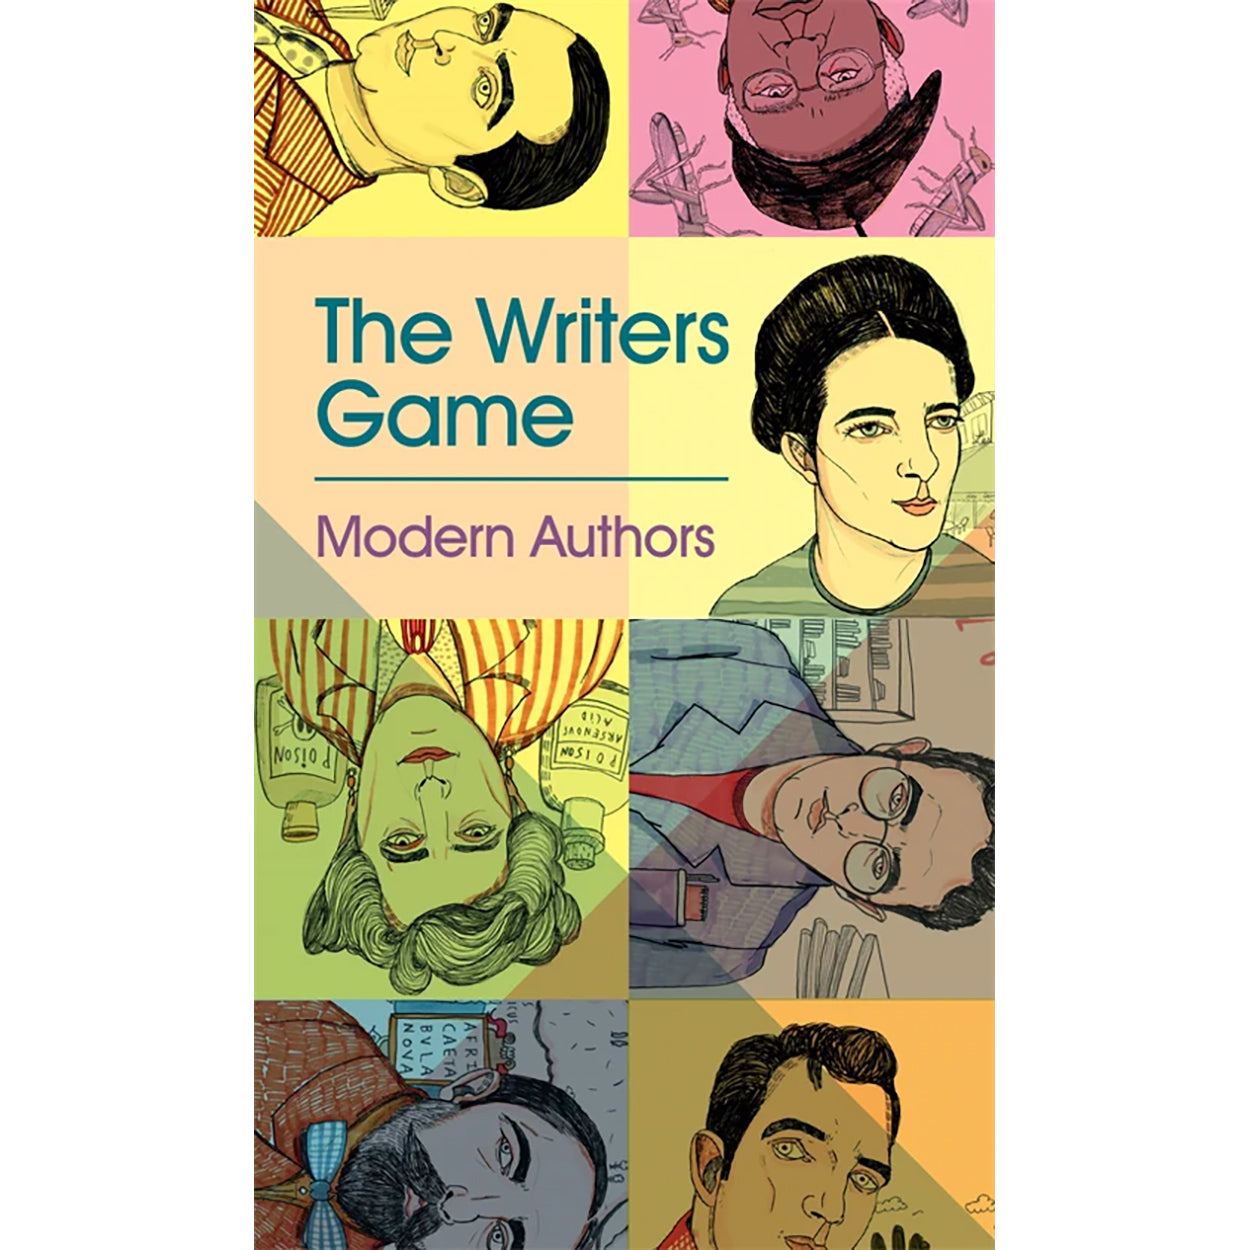 The Writers Game